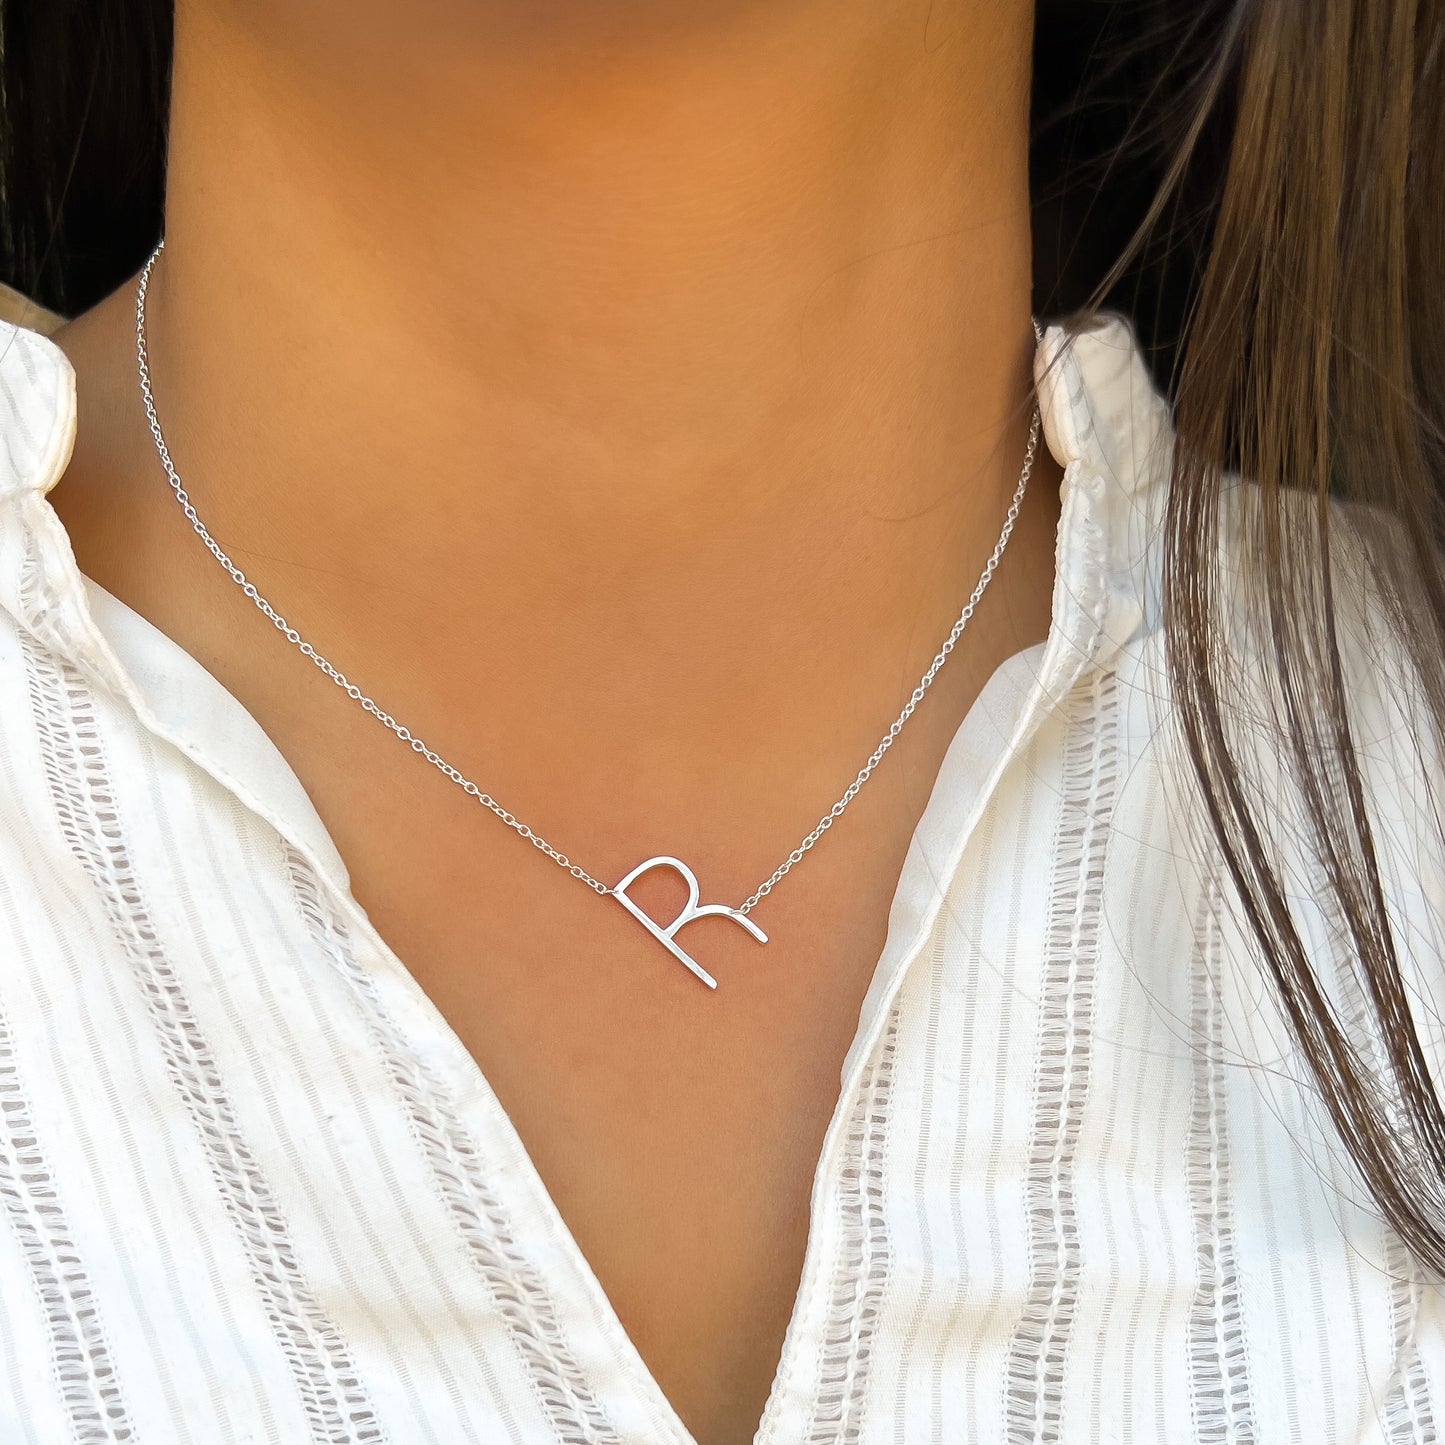 Silver Letter R Initial Necklace - Alexandra Marks jewelry